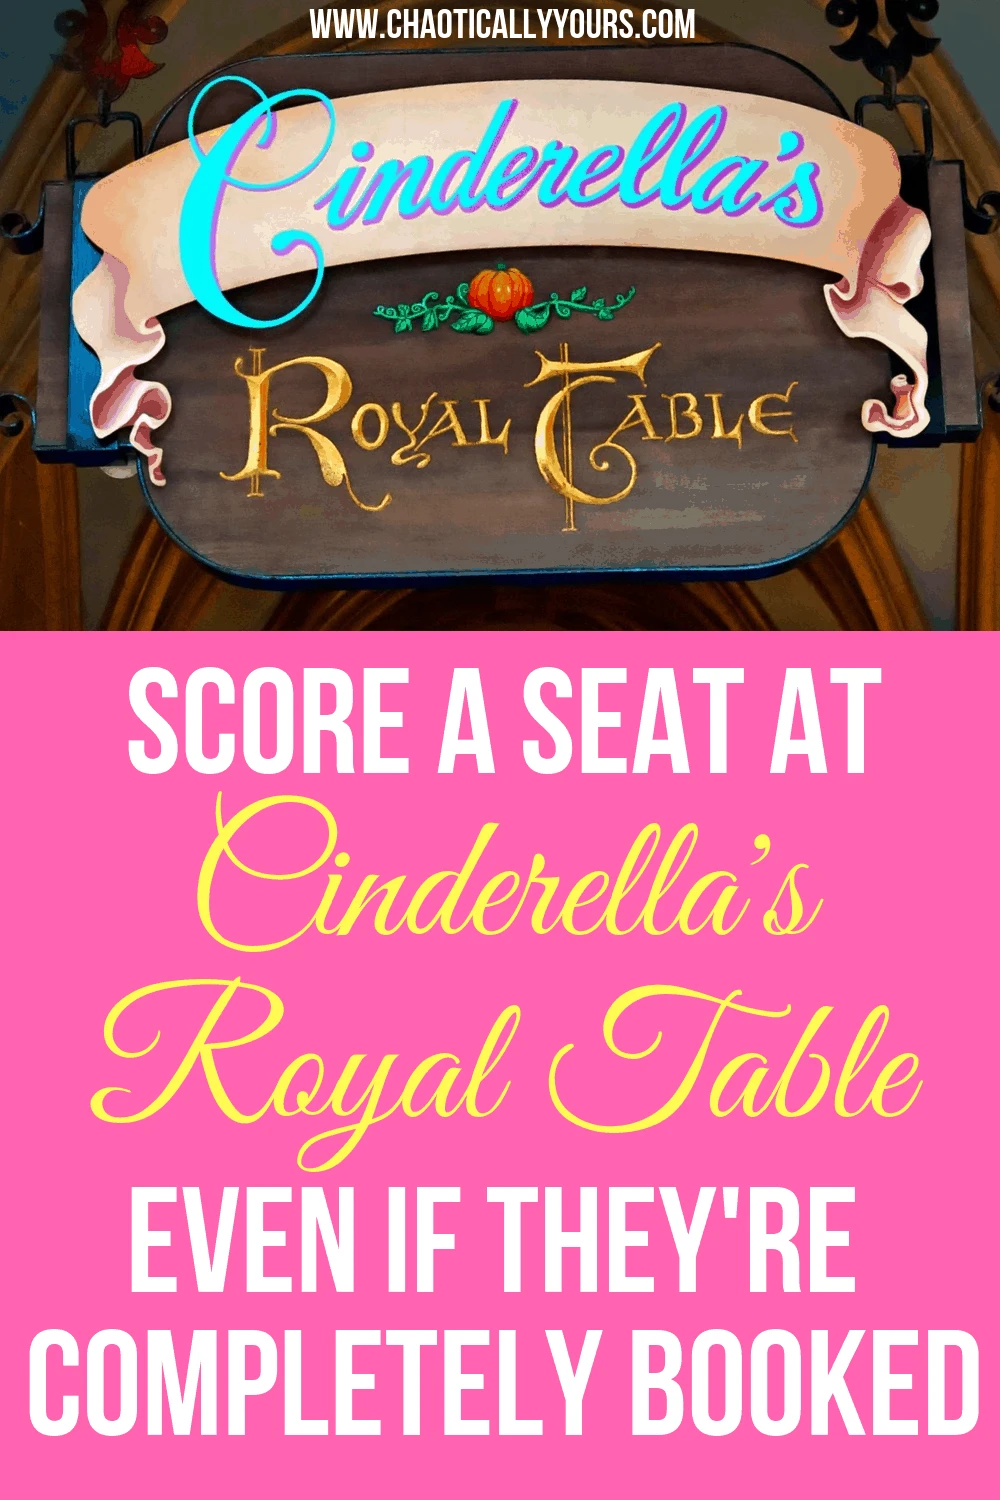 Eat at Cinderella's Royal Table, even if they're already booked up!